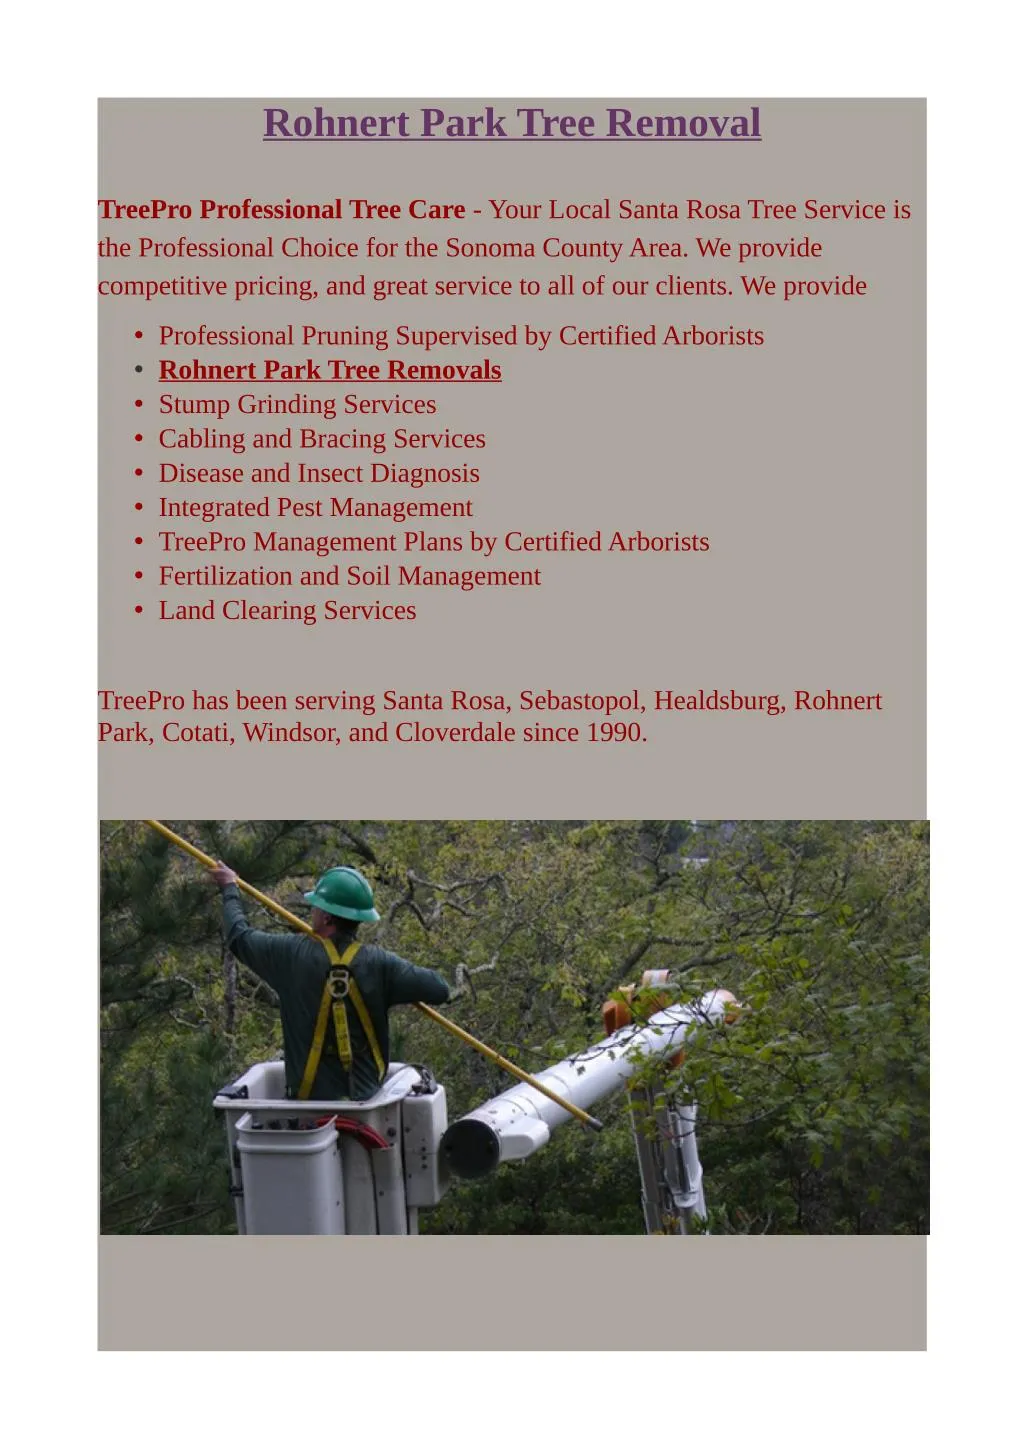 PPT Rohnert Park Tree Removal PowerPoint Presentation, free download